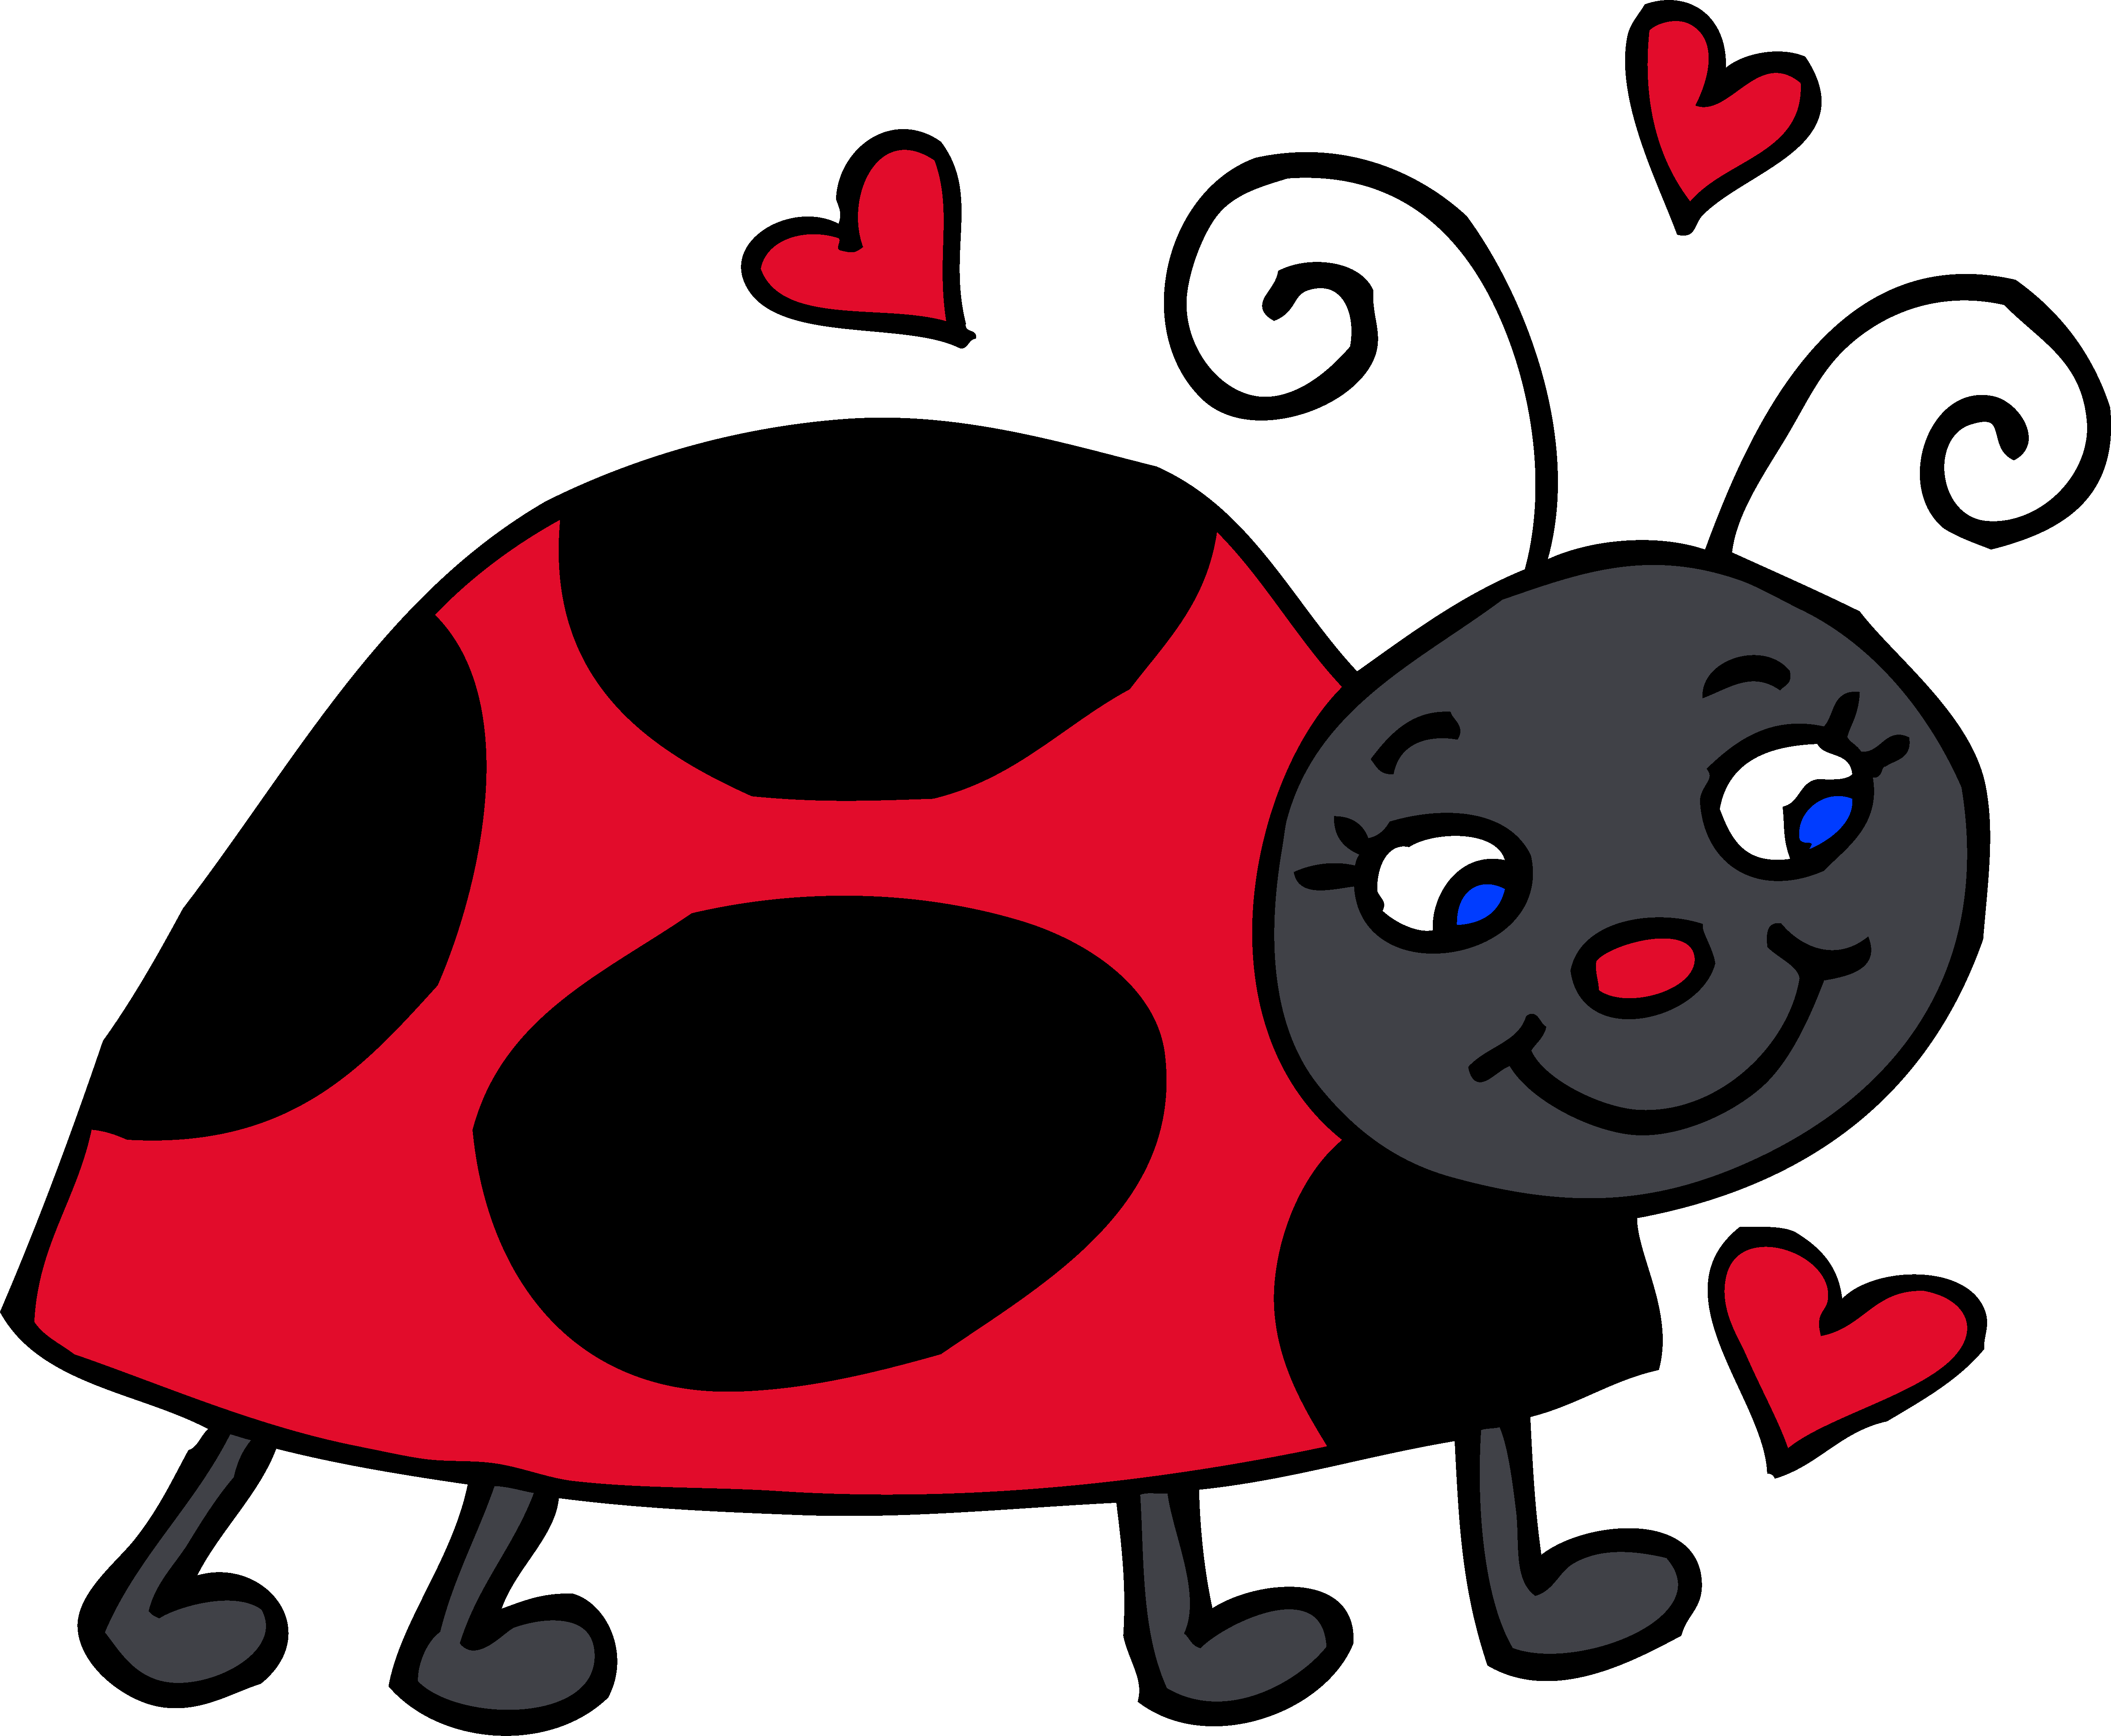 Ladybug clipart girly. Cute red with hearts